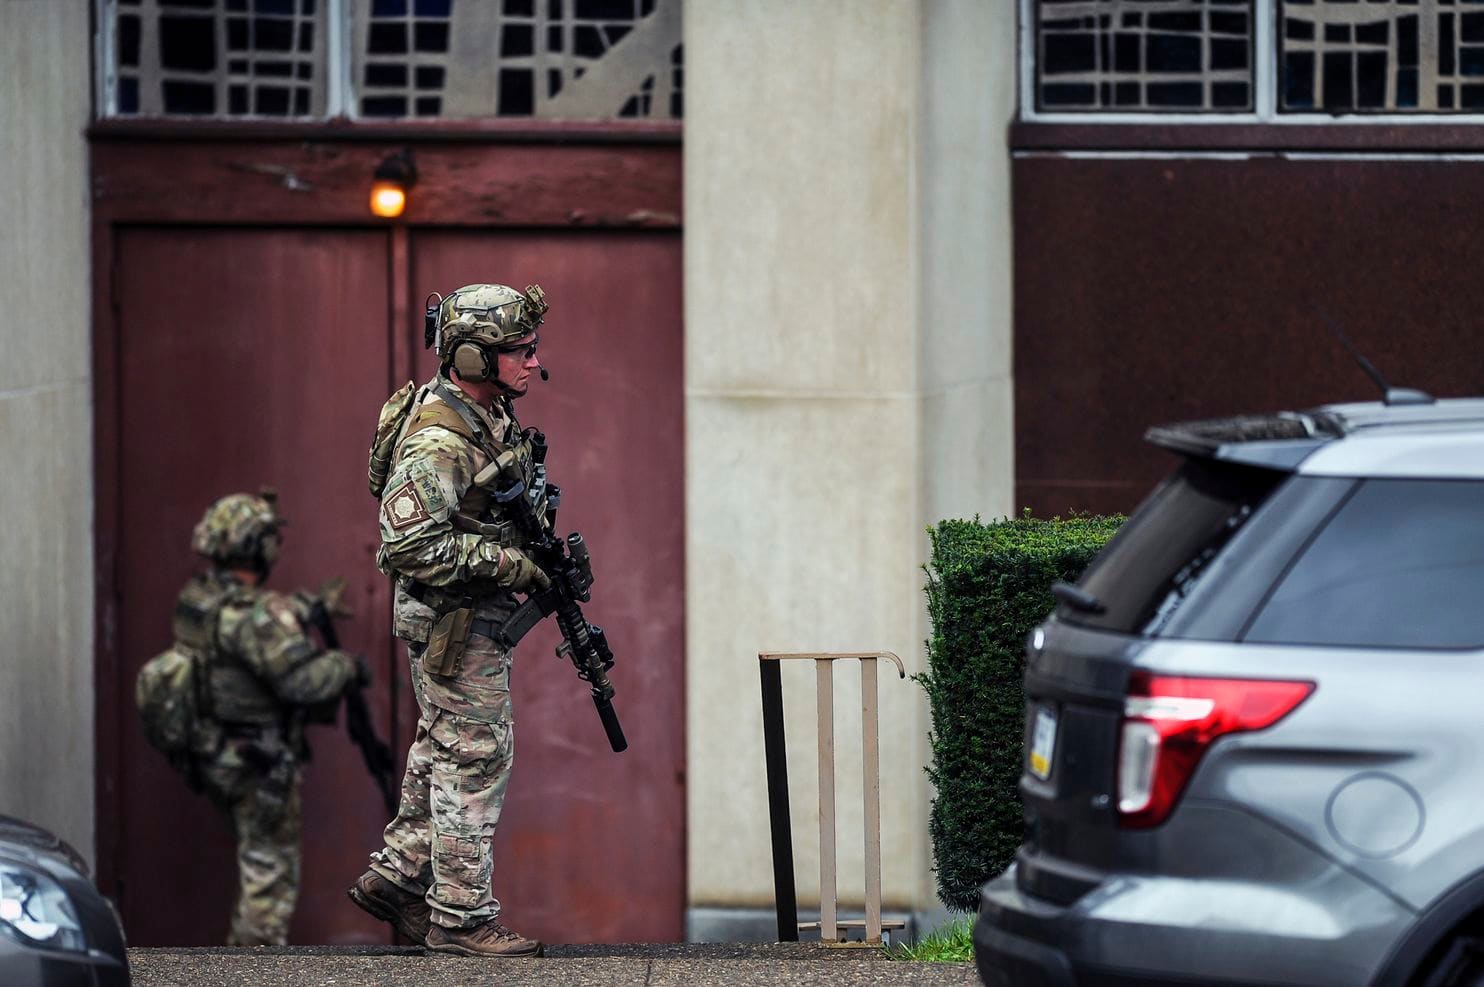 I just want to kill Jews: Documents detail the Pittsburgh synagogue massacre and name the dead